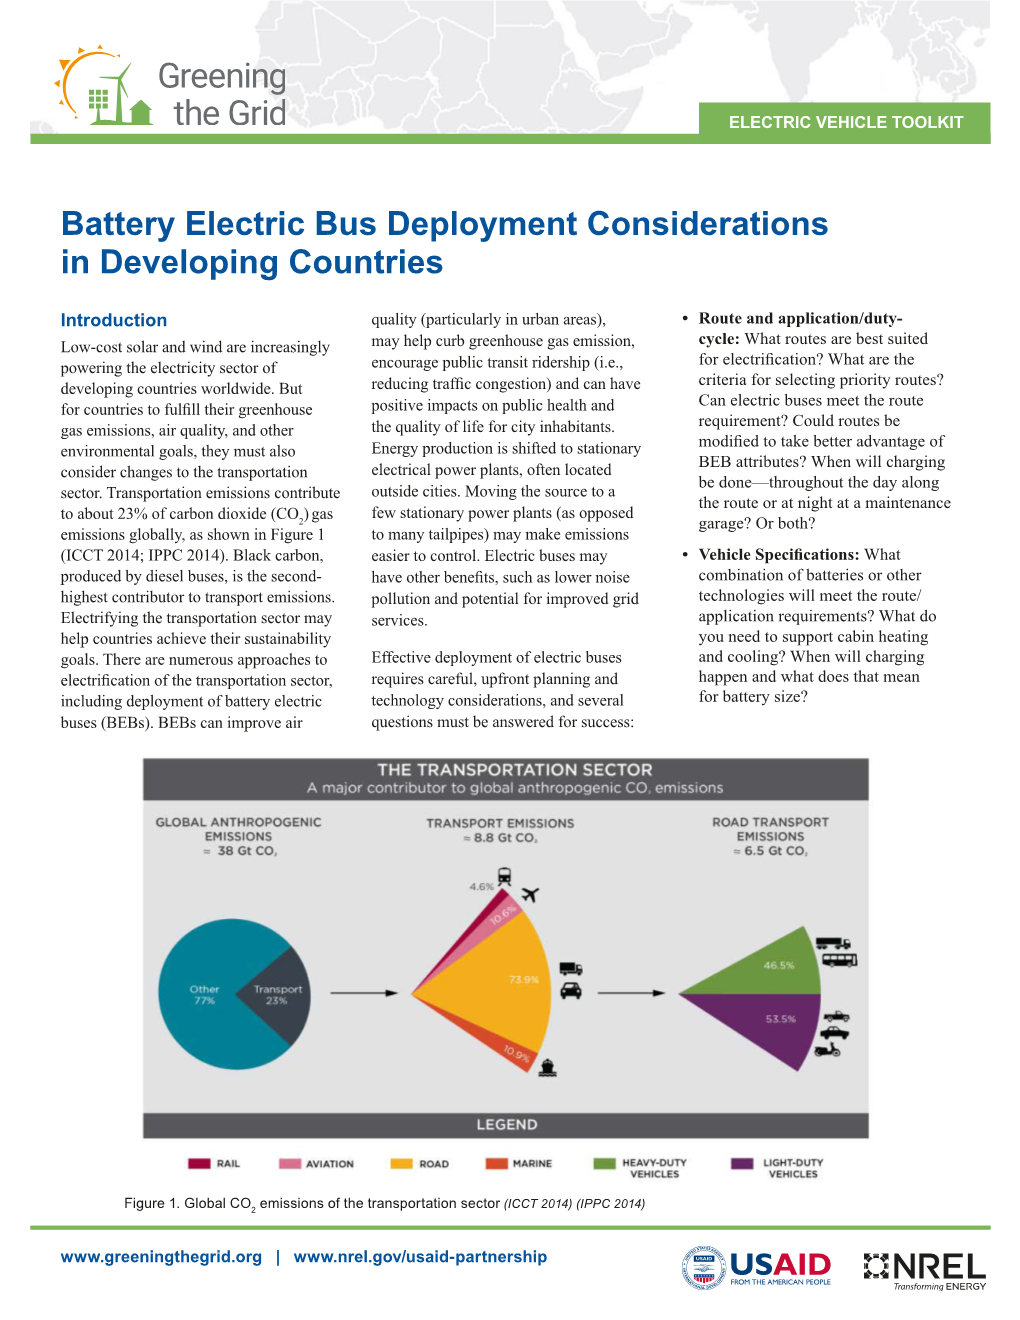 Battery Electric Bus Deployment Considerations in Developing Countries